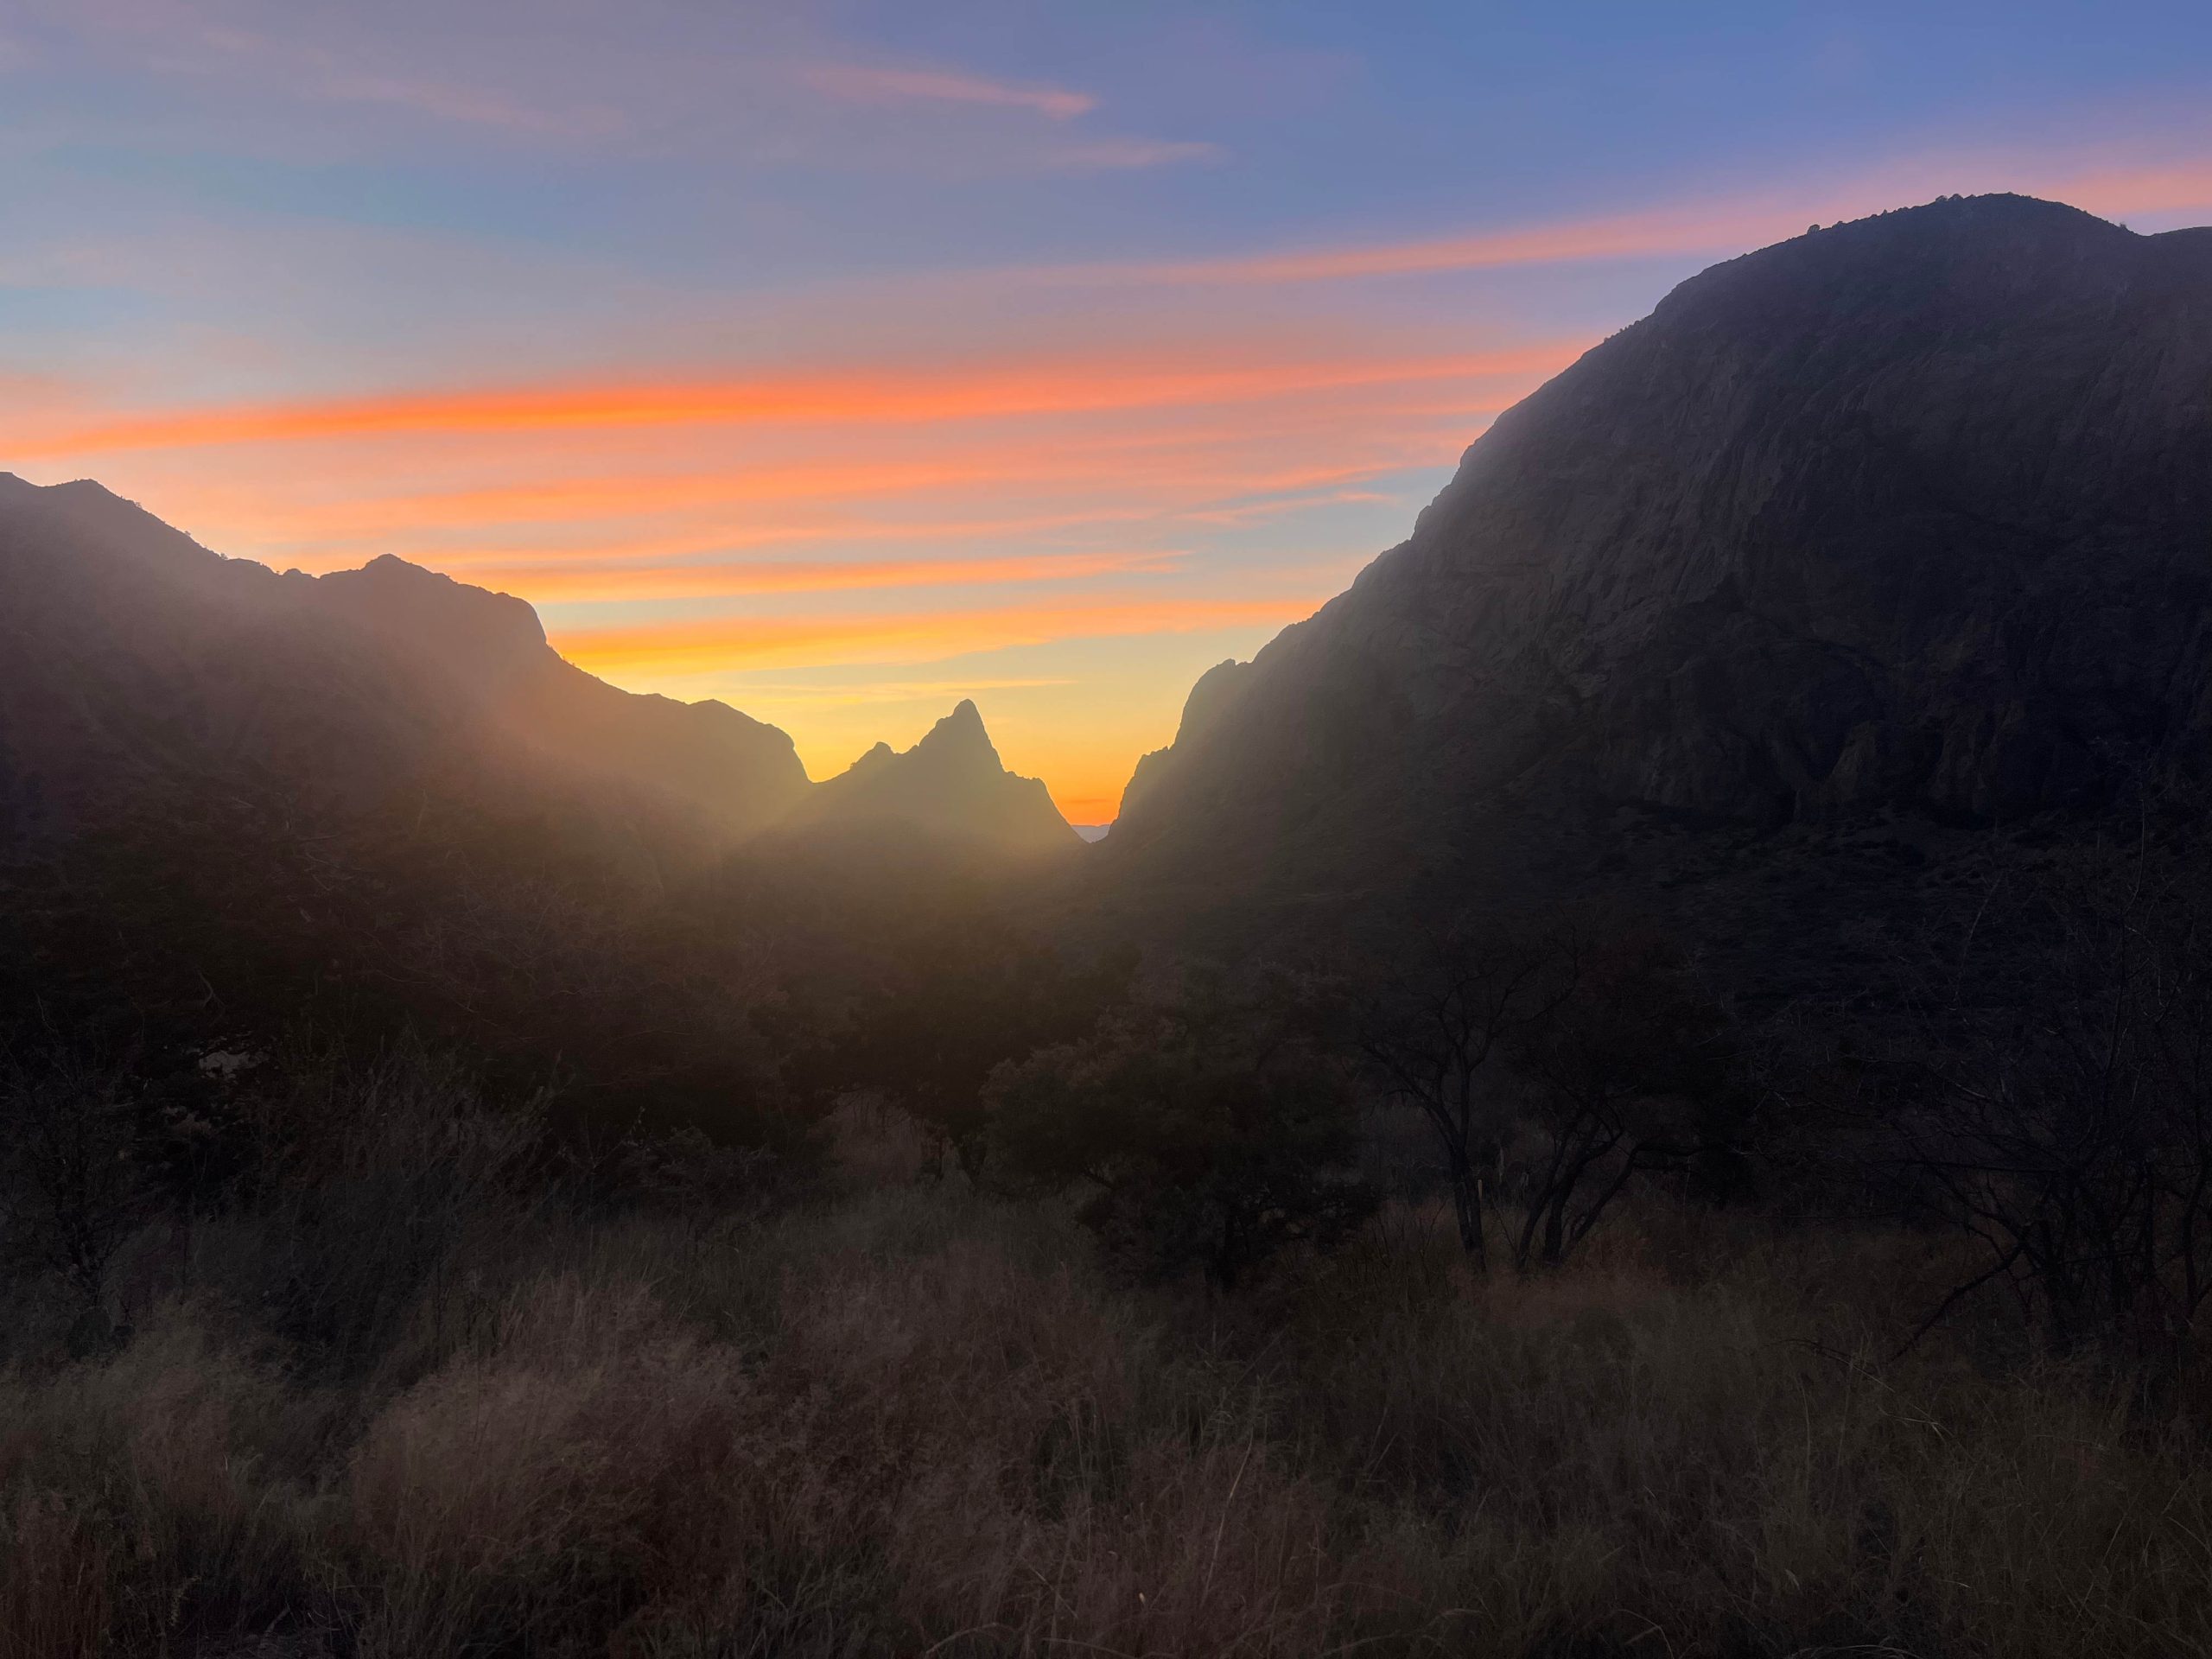 Last Night in Big Bend, What a Sunset!